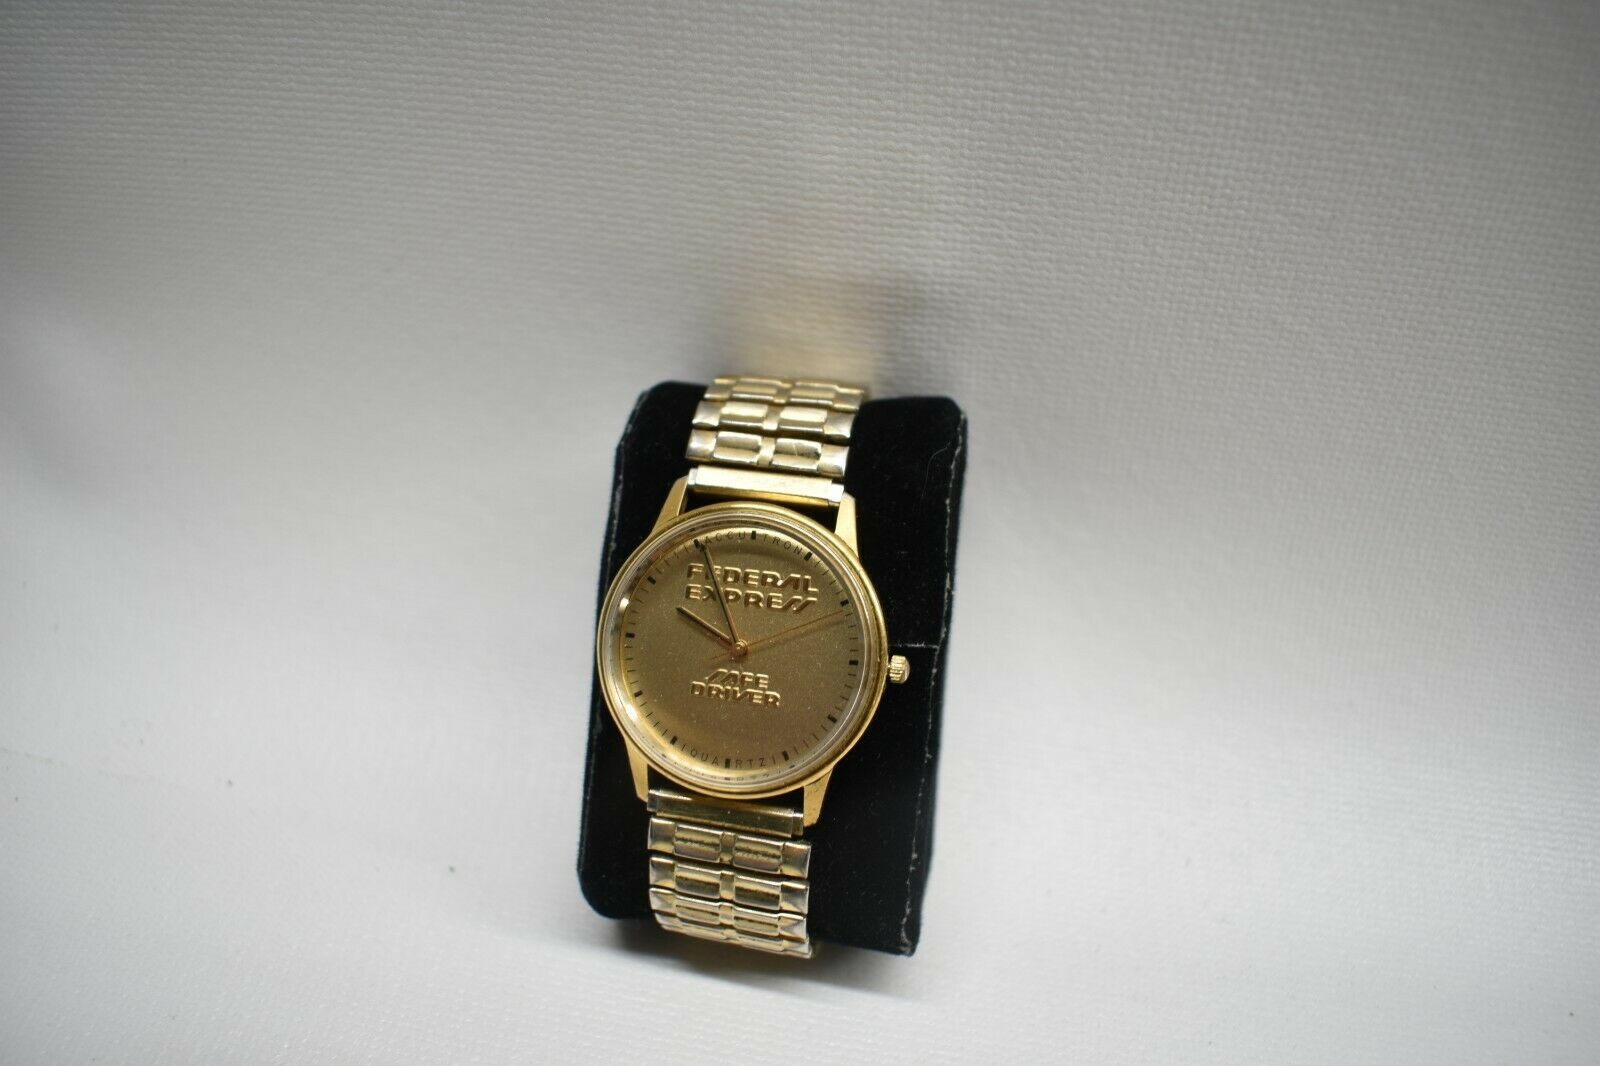 VINTAGE FEREX Hand Wind Pendant Watch no Chain Heart Shaped Face Beautiful  Unusual Watch Working - Etsy